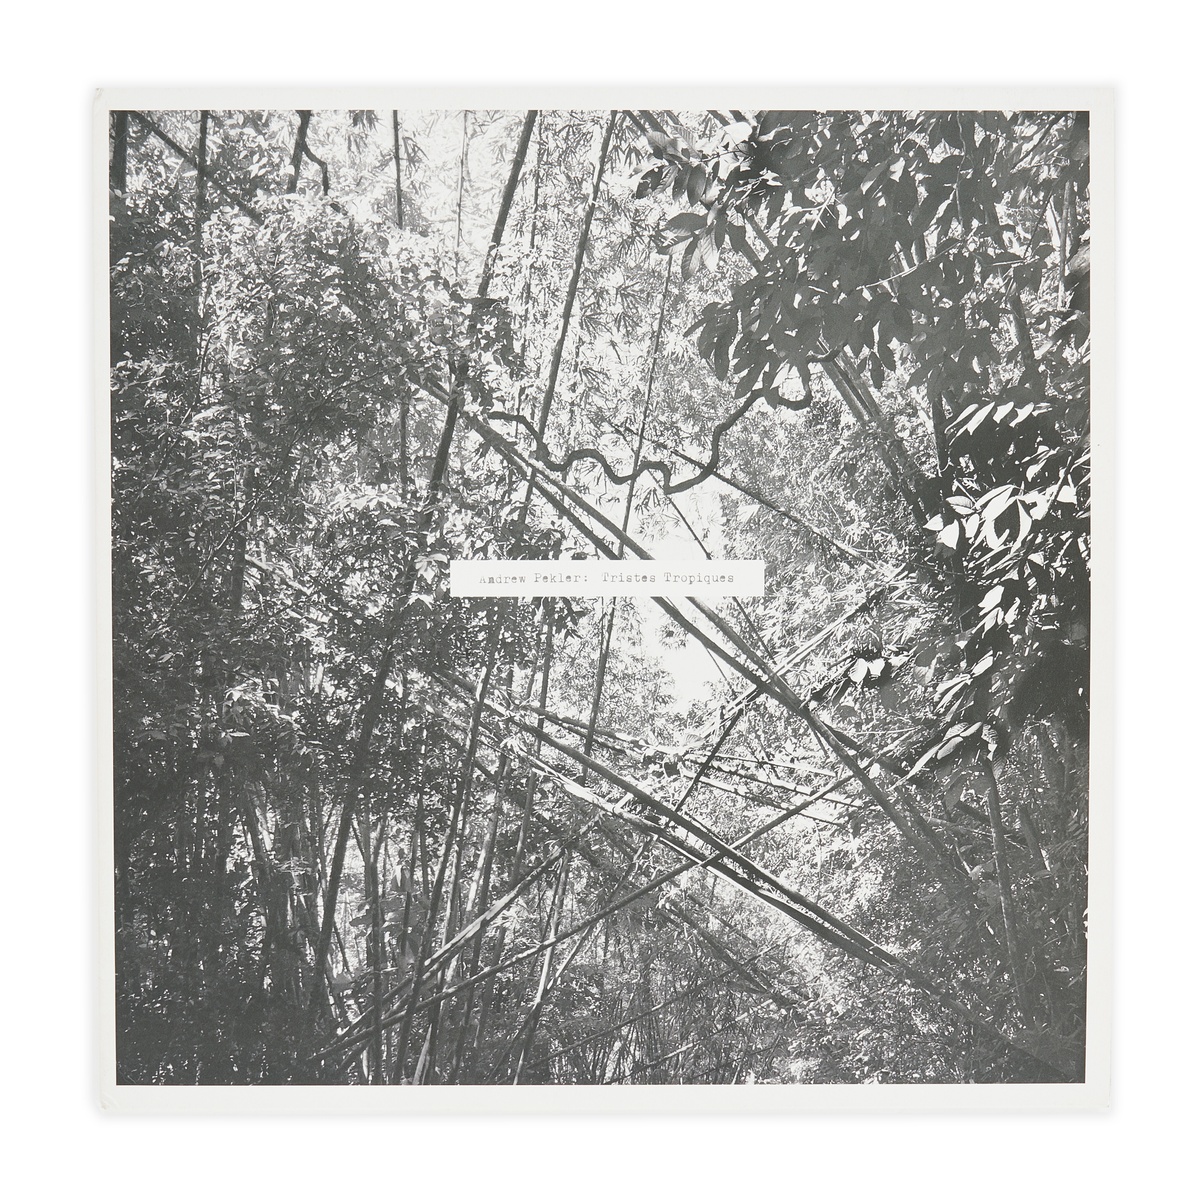 Photograph of the cover of Andrew Pekler's 12" vinyl record 'Tristes Tropiques'.
